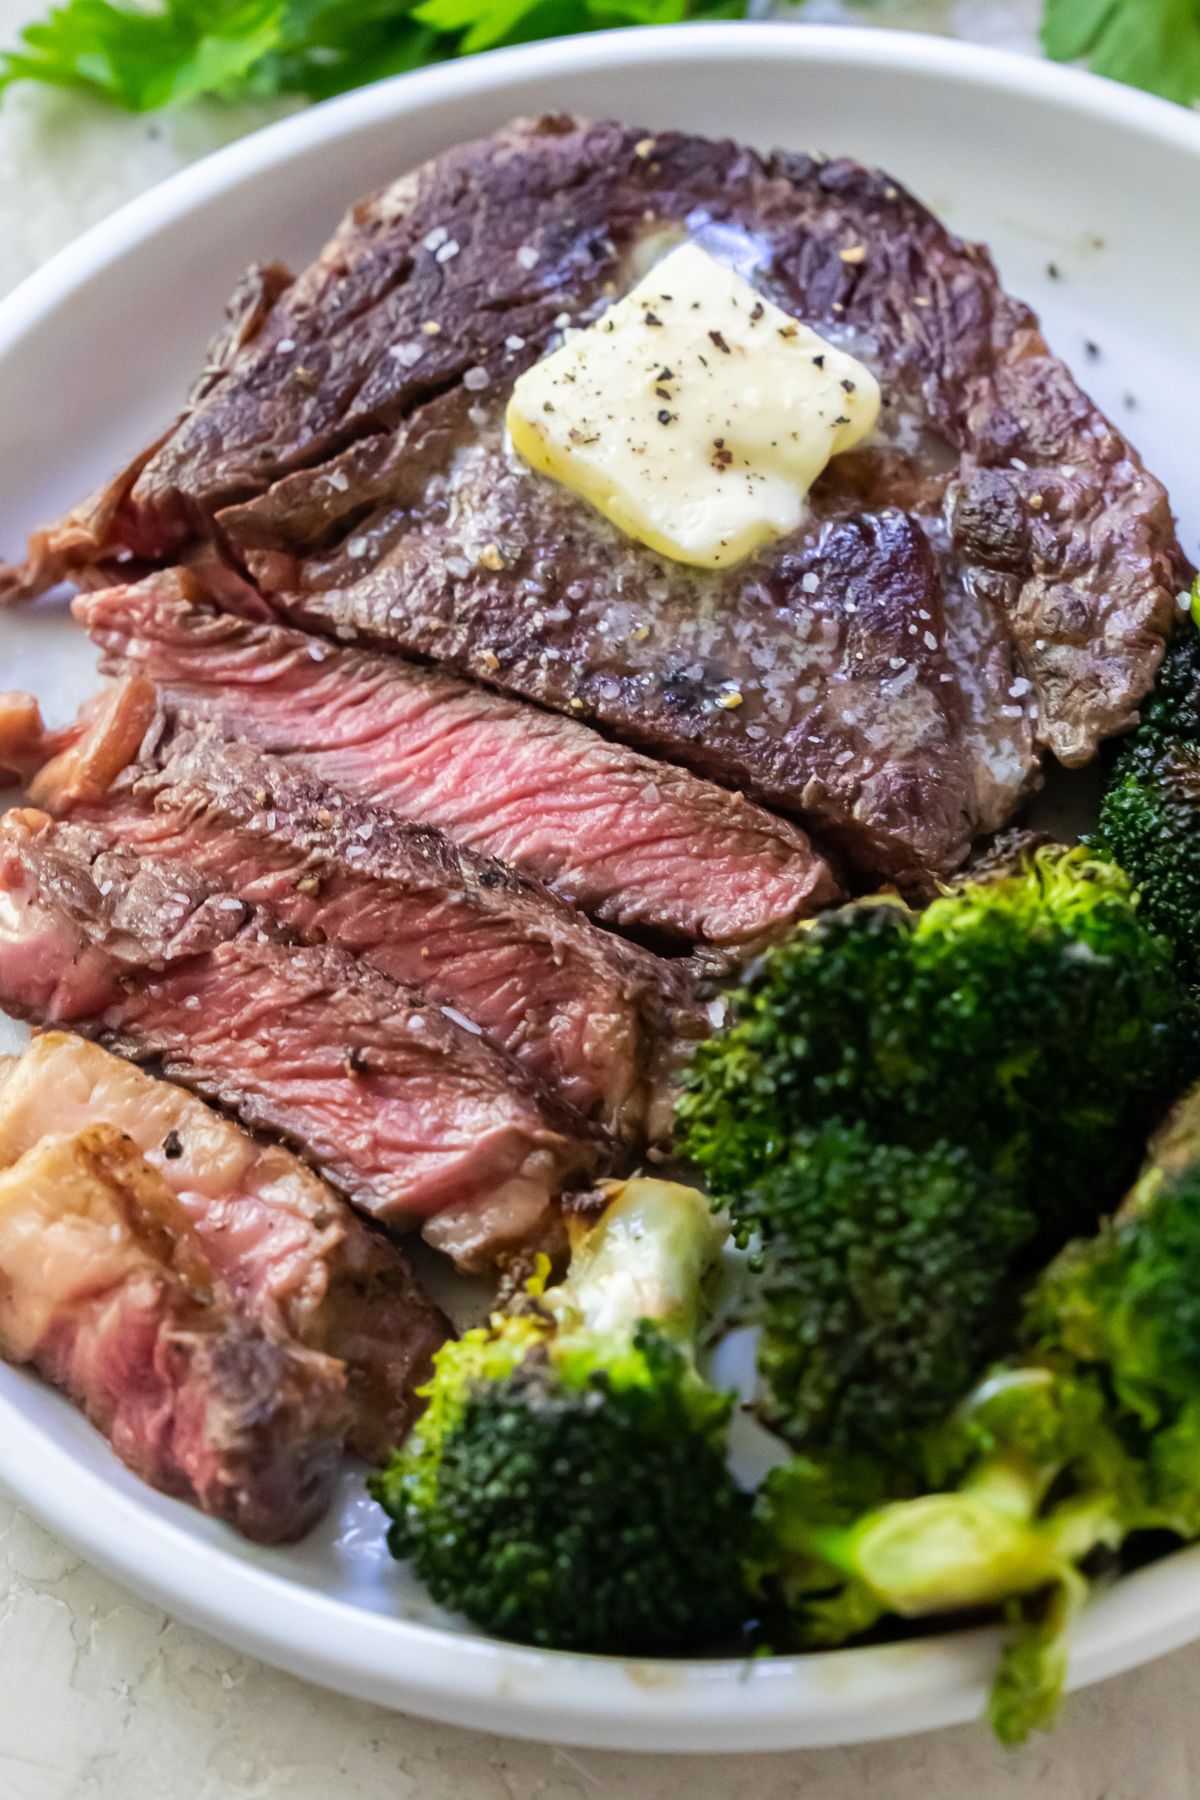 a medium rare ribeye steak that has been sliced on a white plate with a side of broccoli topped with butter.